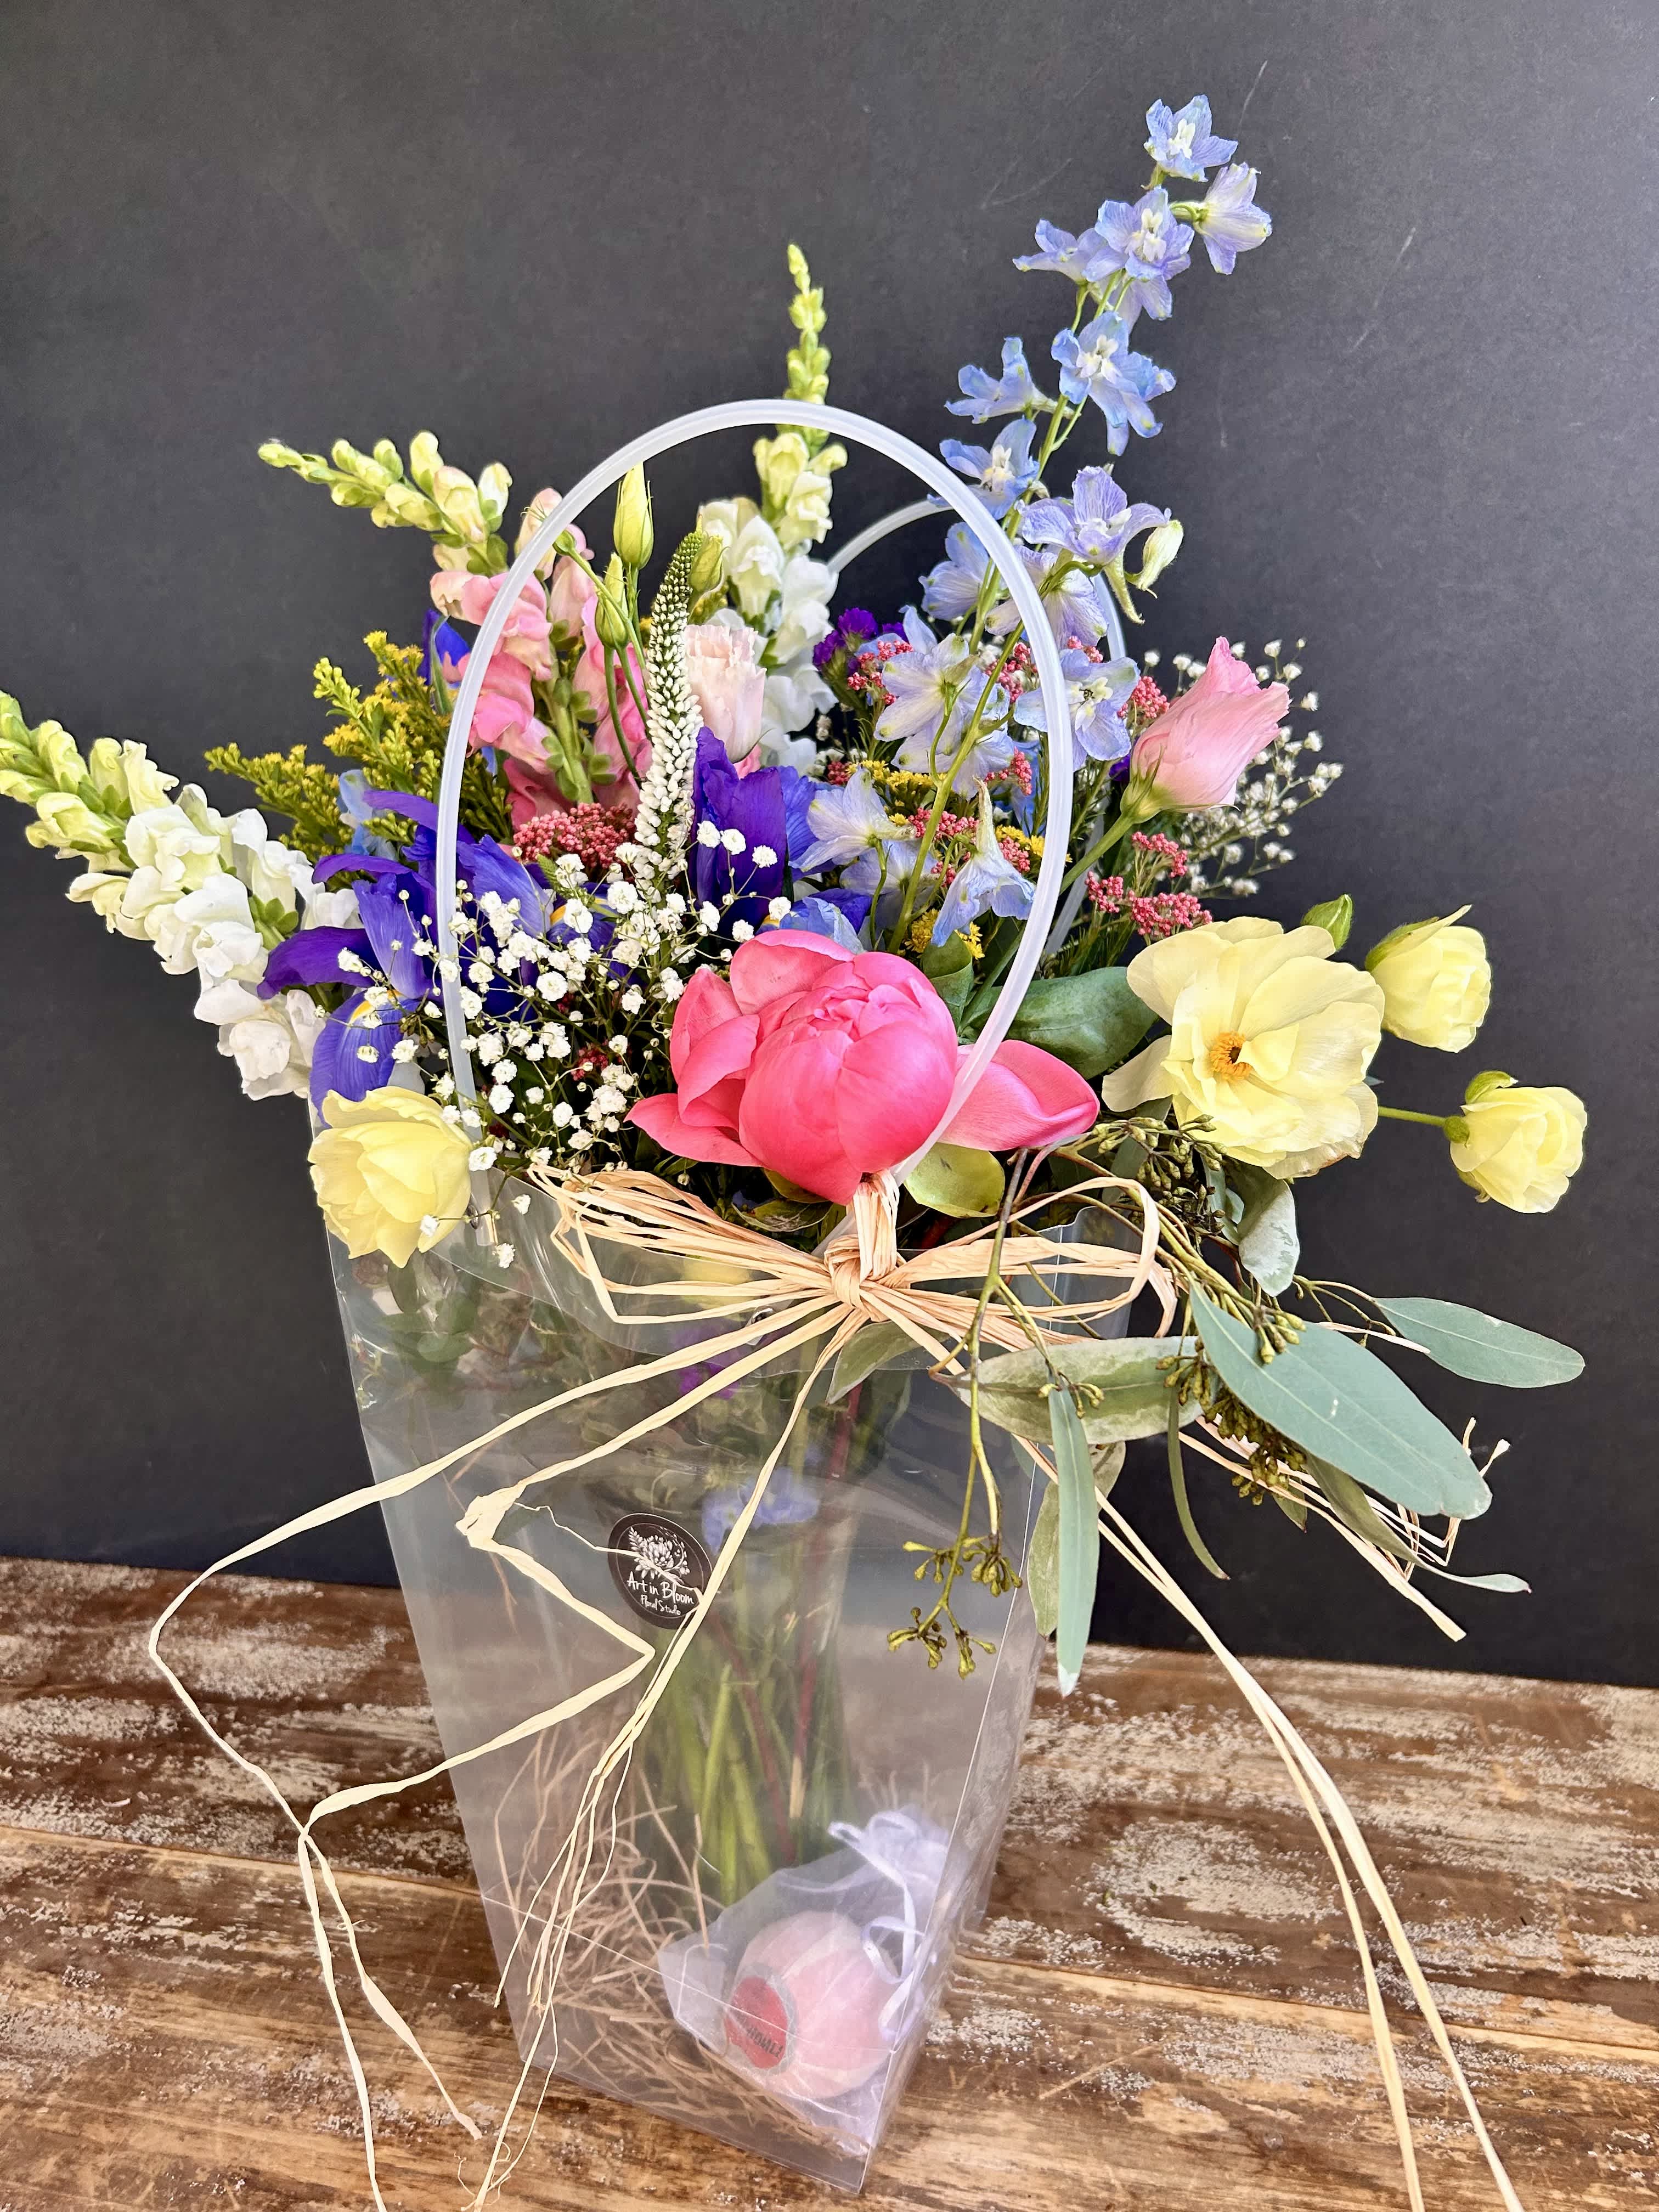 Mother's Day Special - A tote bag with an assortment of fresh blooms in a vase and a bath bomb (fragrances will vary) could make a perfect start to someone's Mother's Day! The design is roughly 2' tall. The deluxe version will have two bath bombs and more blooms.